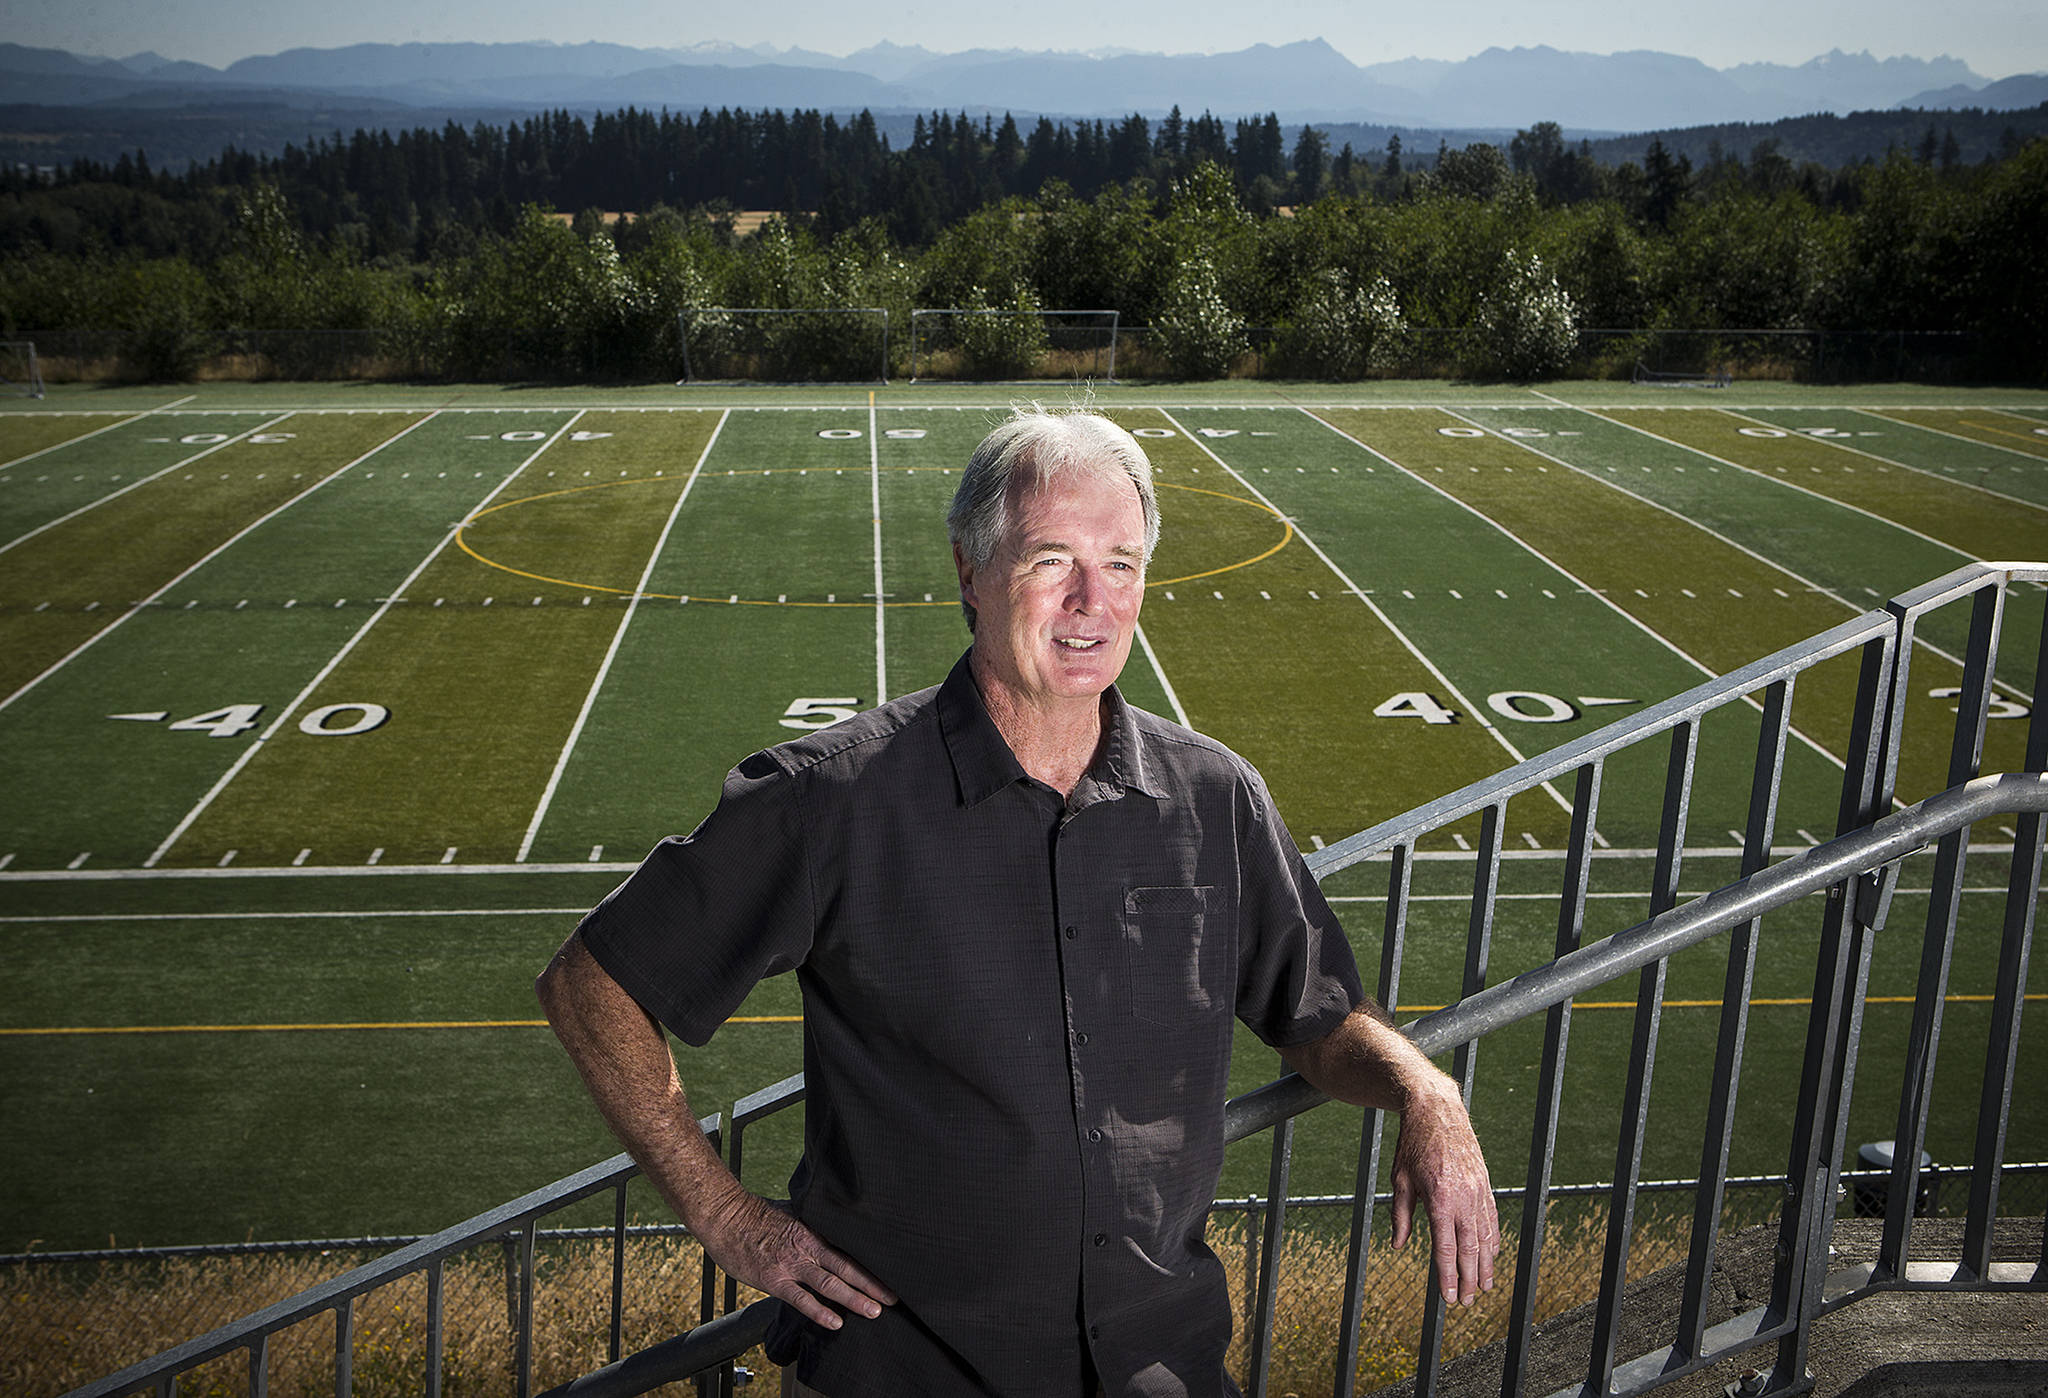 Longtime Snohomish School District coach and athletic director Mark Albertine is retiring after 41 years. (Ian Terry / The Herald)